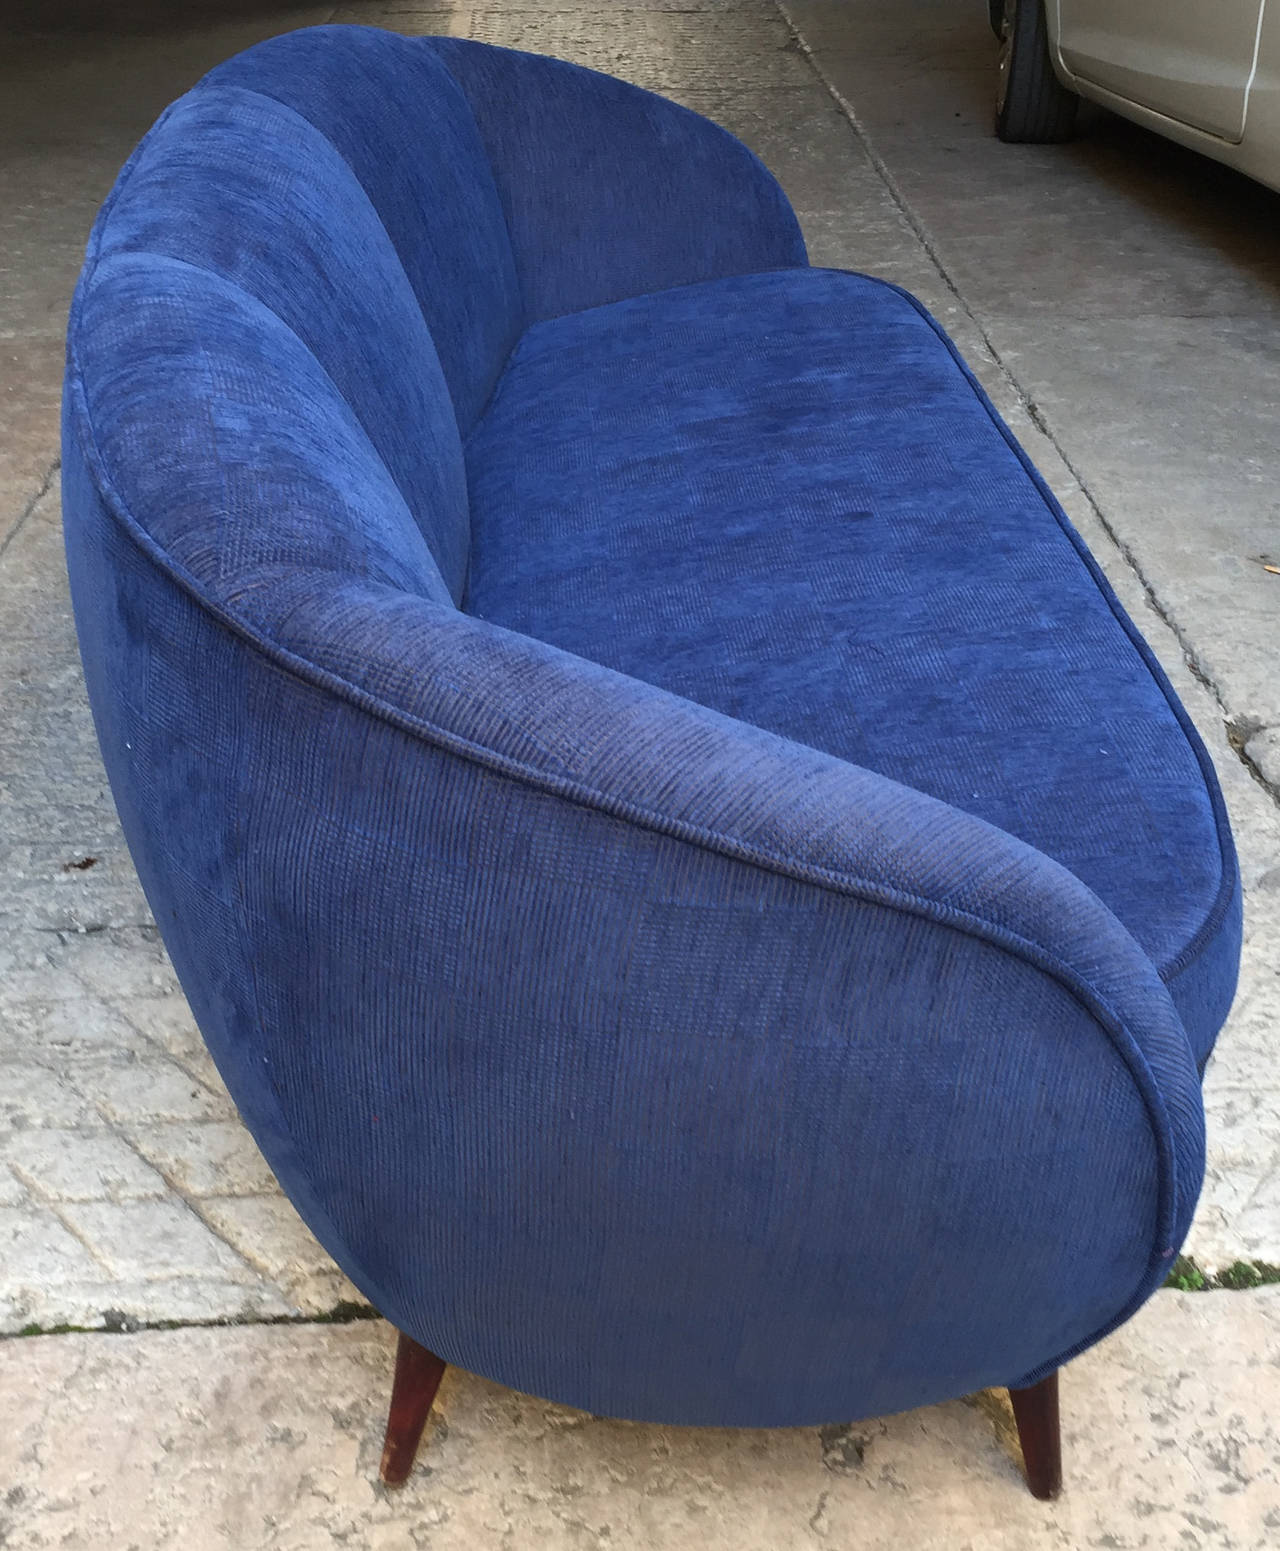 Curved sofa, Italian Design in 1950, the original model in the style of Gio Ponti, in perfect condition, has been restored, the fabric is new, it slightly curved, very comfortable, and decorative